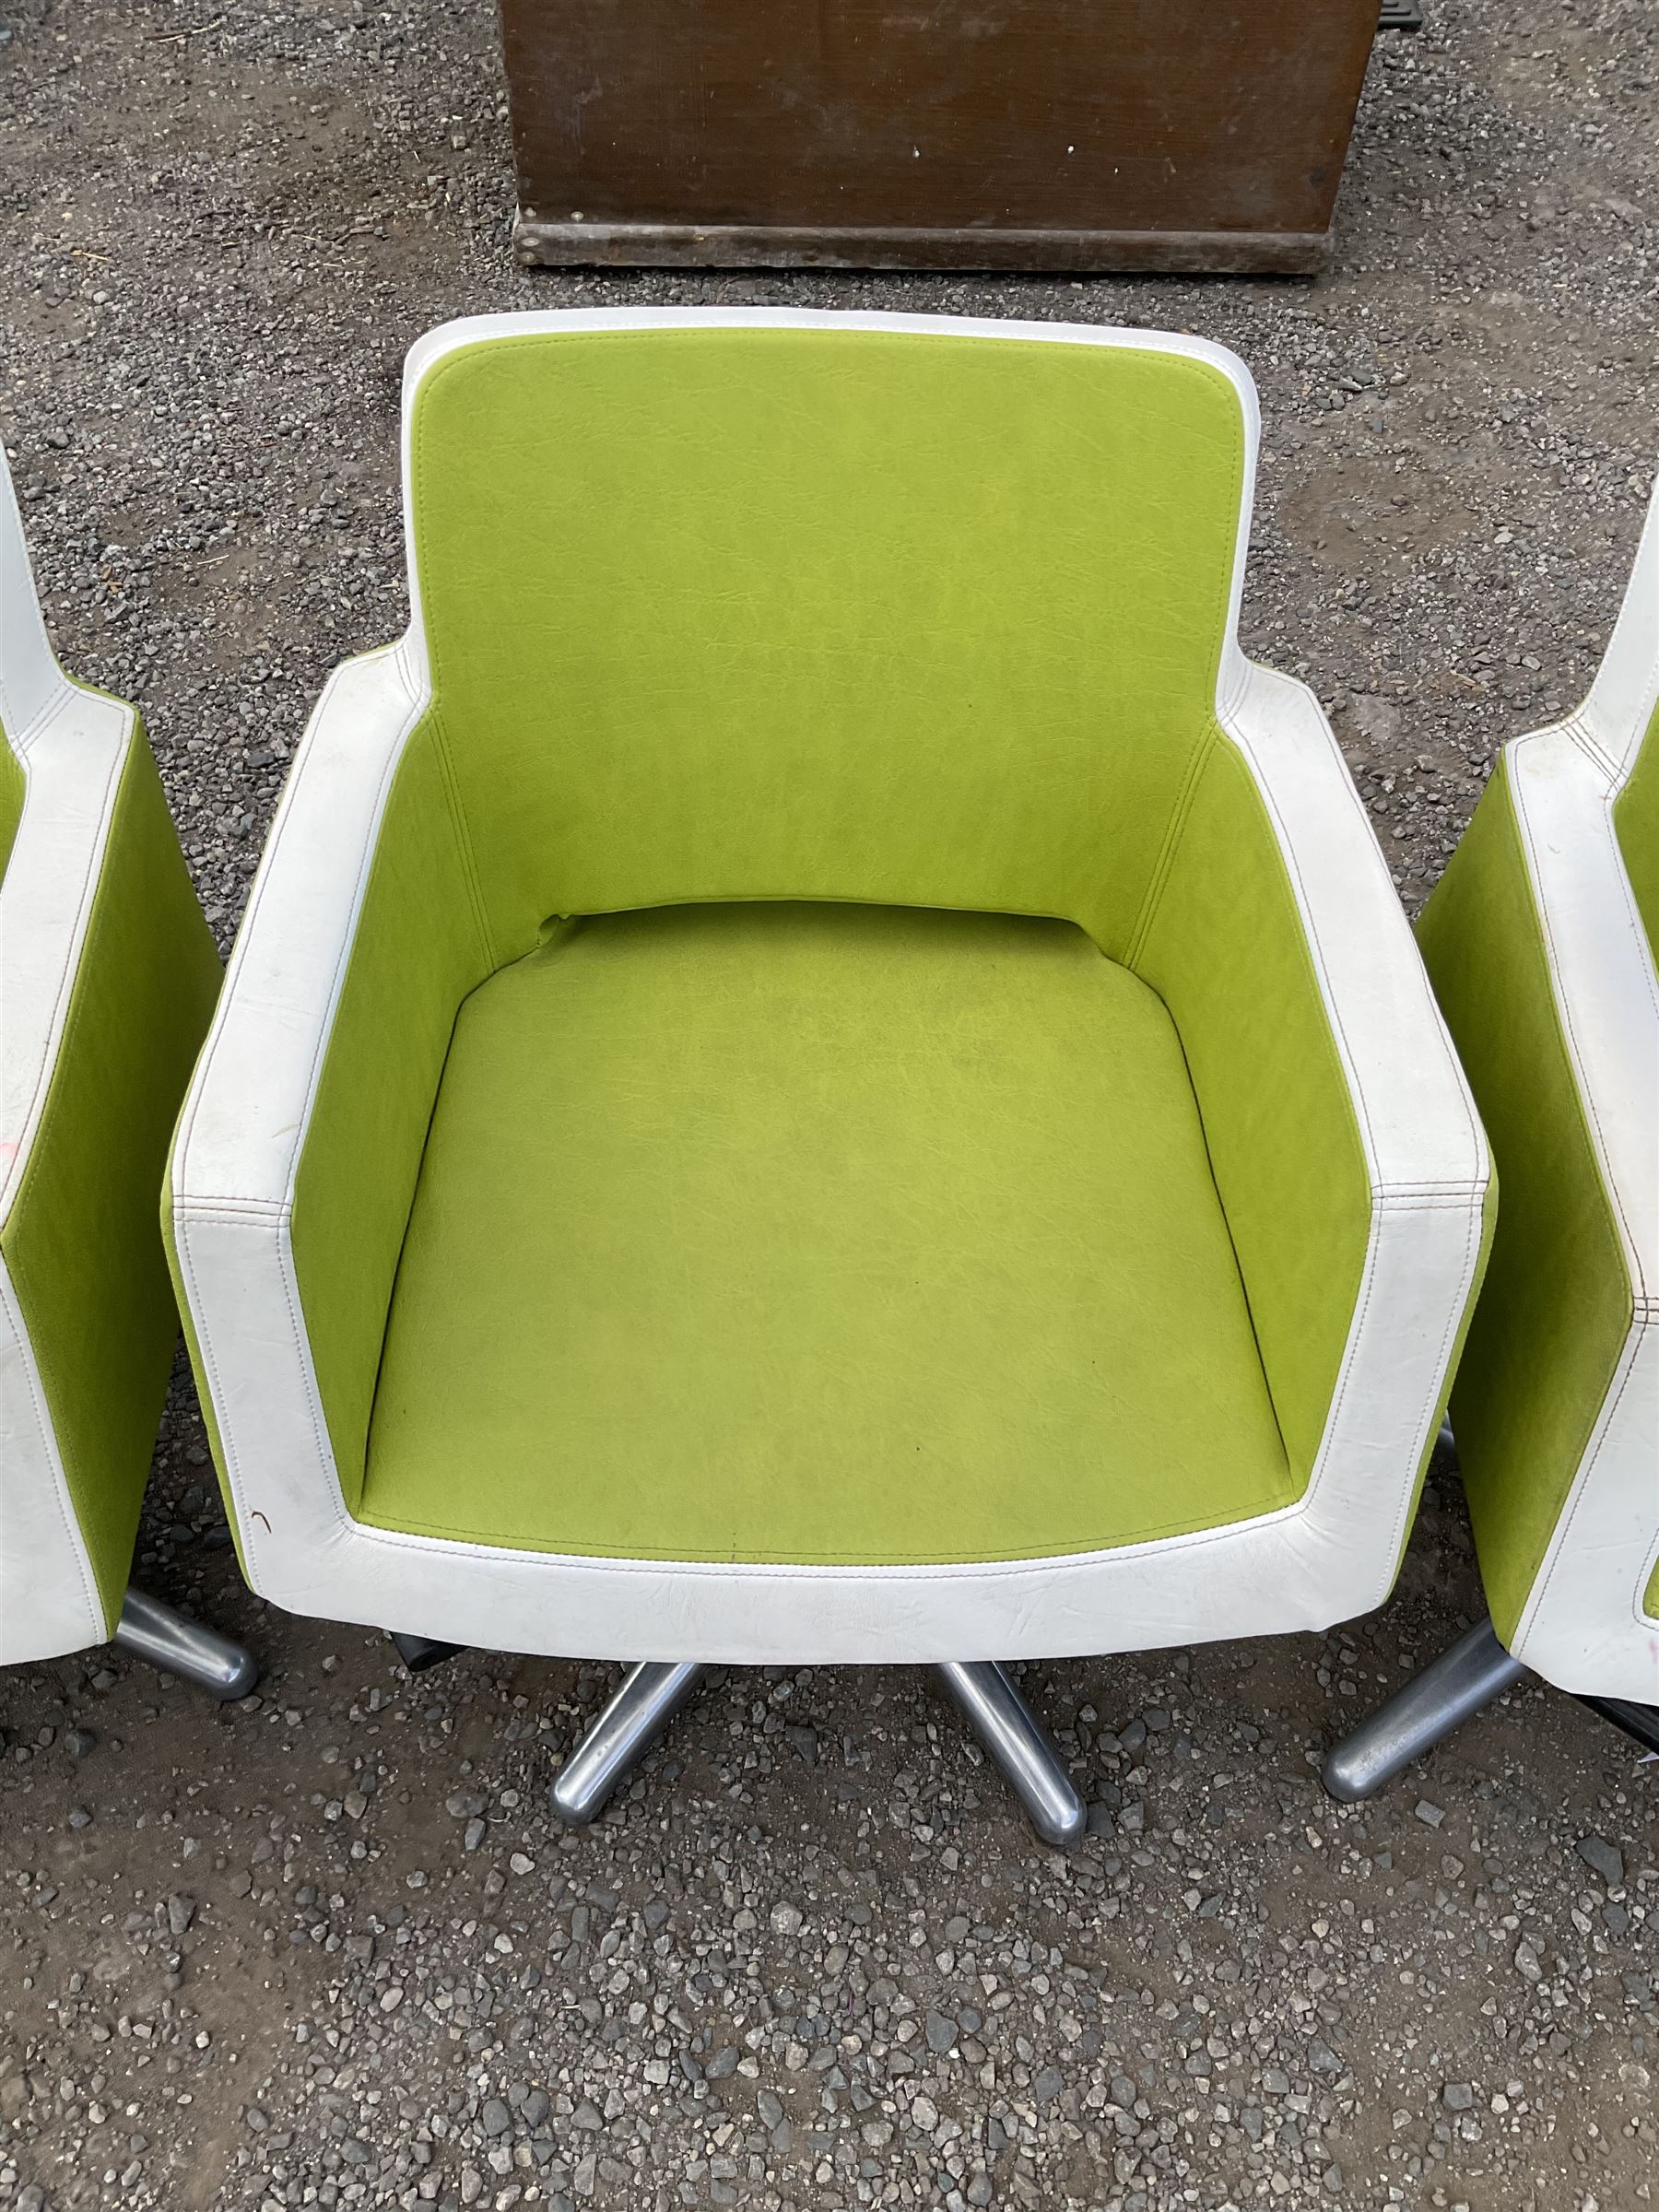 Salon Equipment - Set of four green and white faux leather hydraulic styling salon chairs - THIS LOT - Image 3 of 5